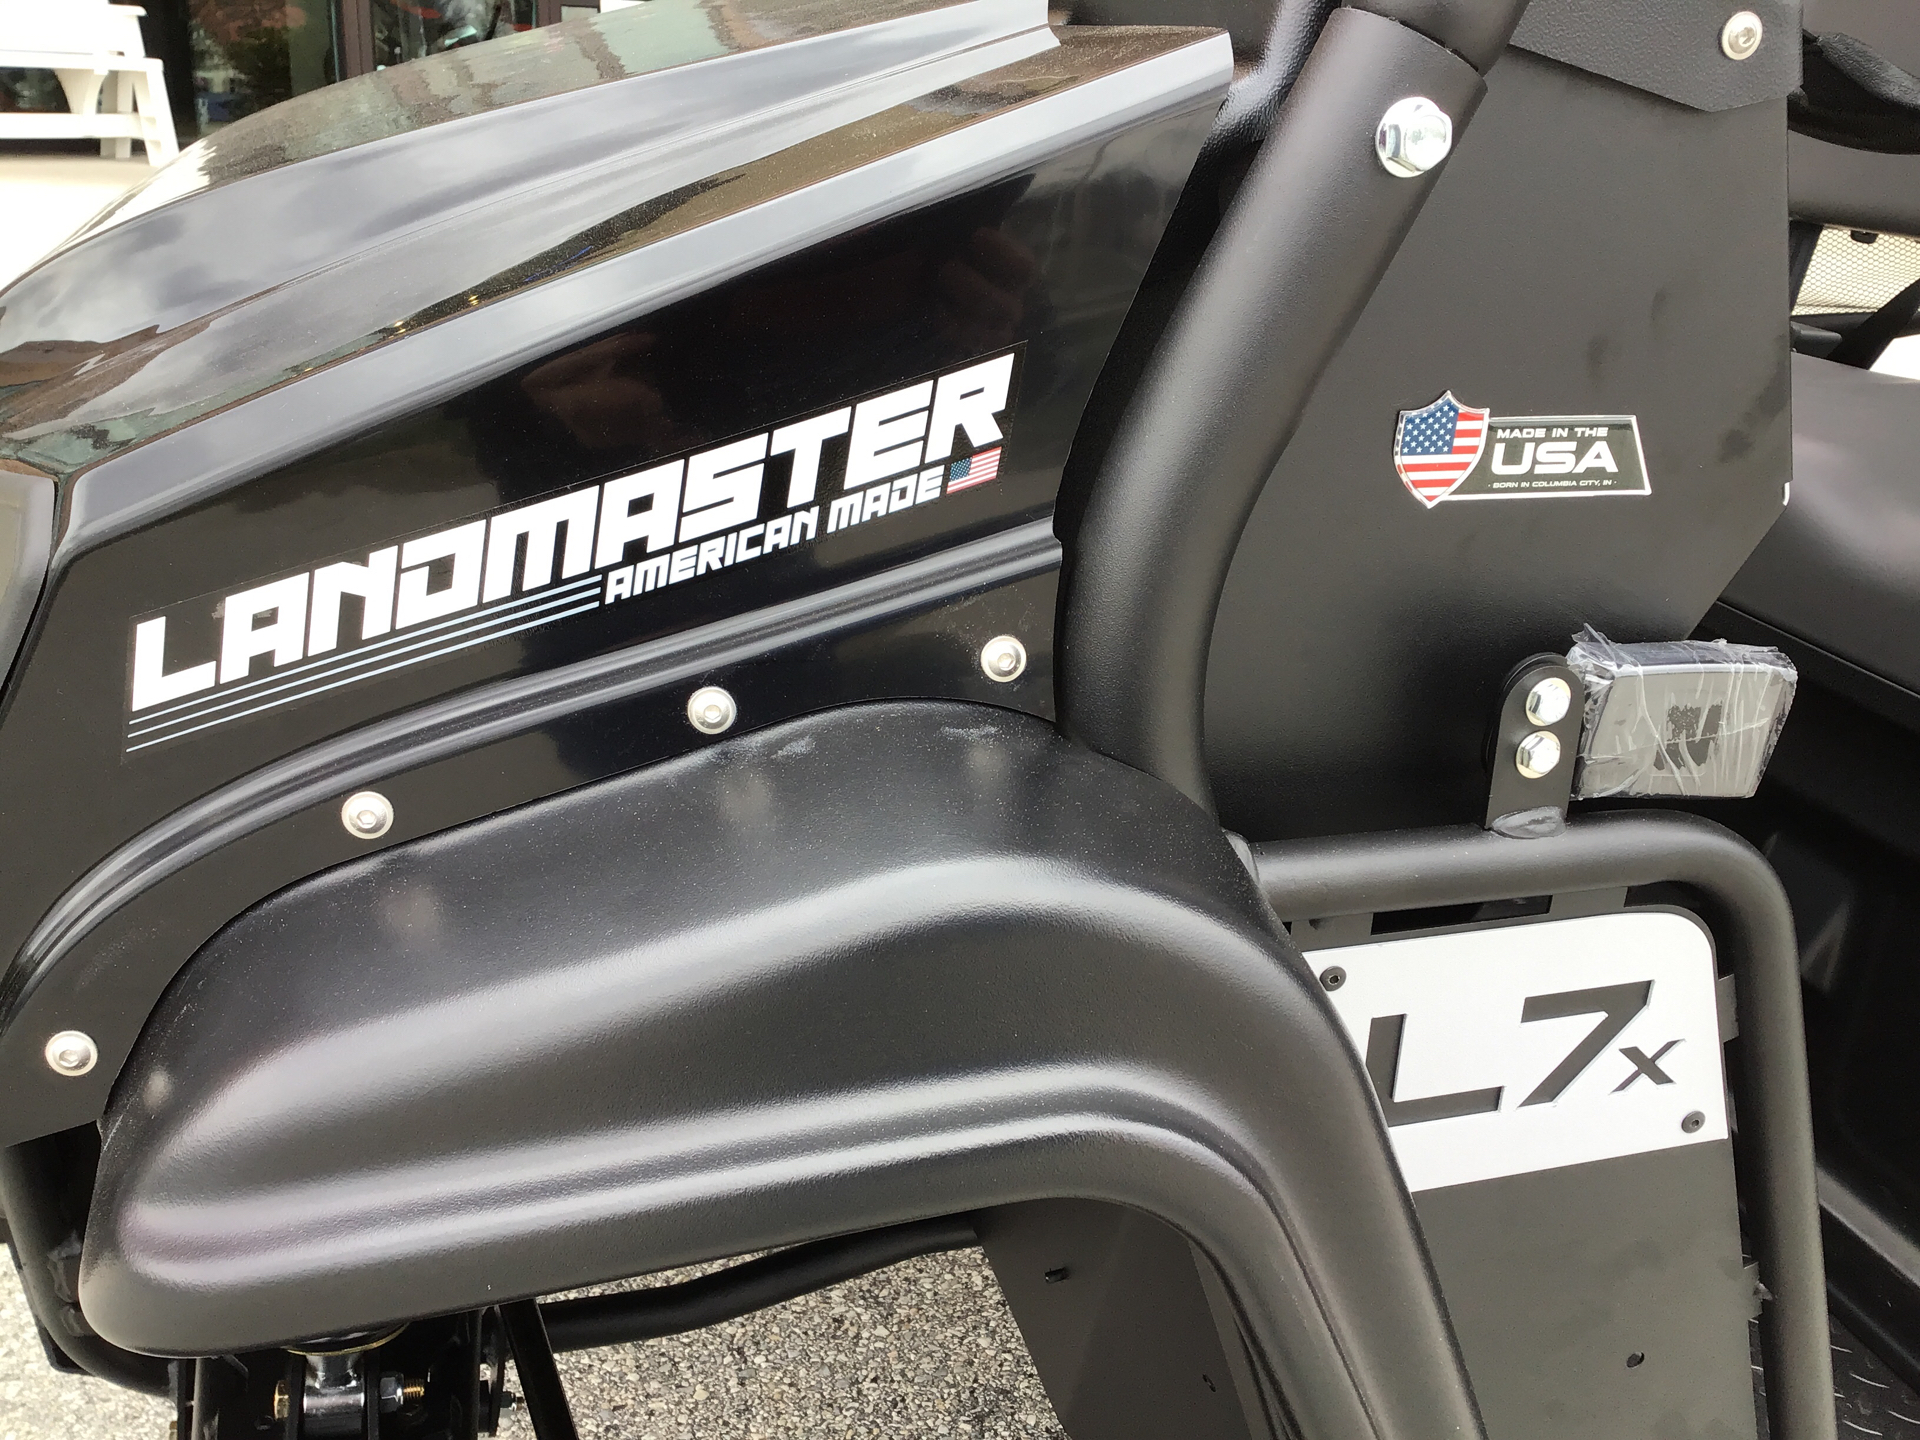 2022 American Landmaster L7x Trail Package in West Chester, Pennsylvania - Photo 8